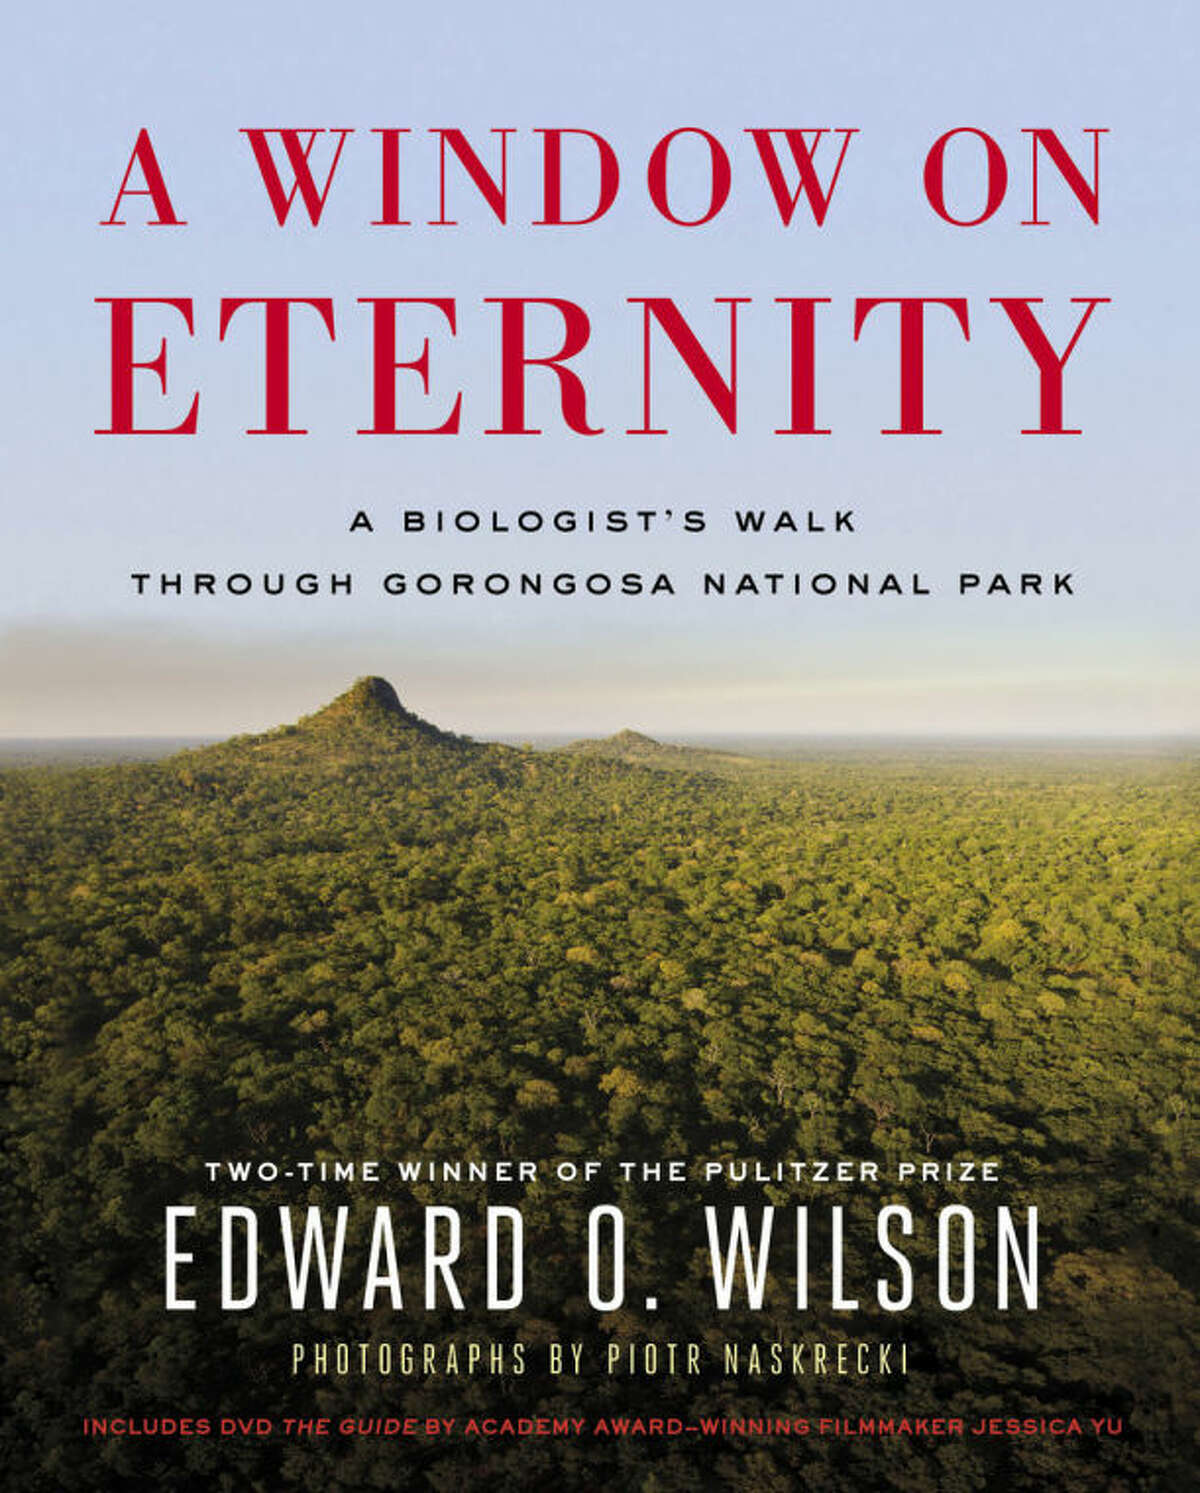 This book cover image released by Simon & Schuster shows "A Window on Eternity: A Biologist's Walk Through Gorongosa National Park," by Edward O. Wilson. (AP Photo/Simon & Schuster)